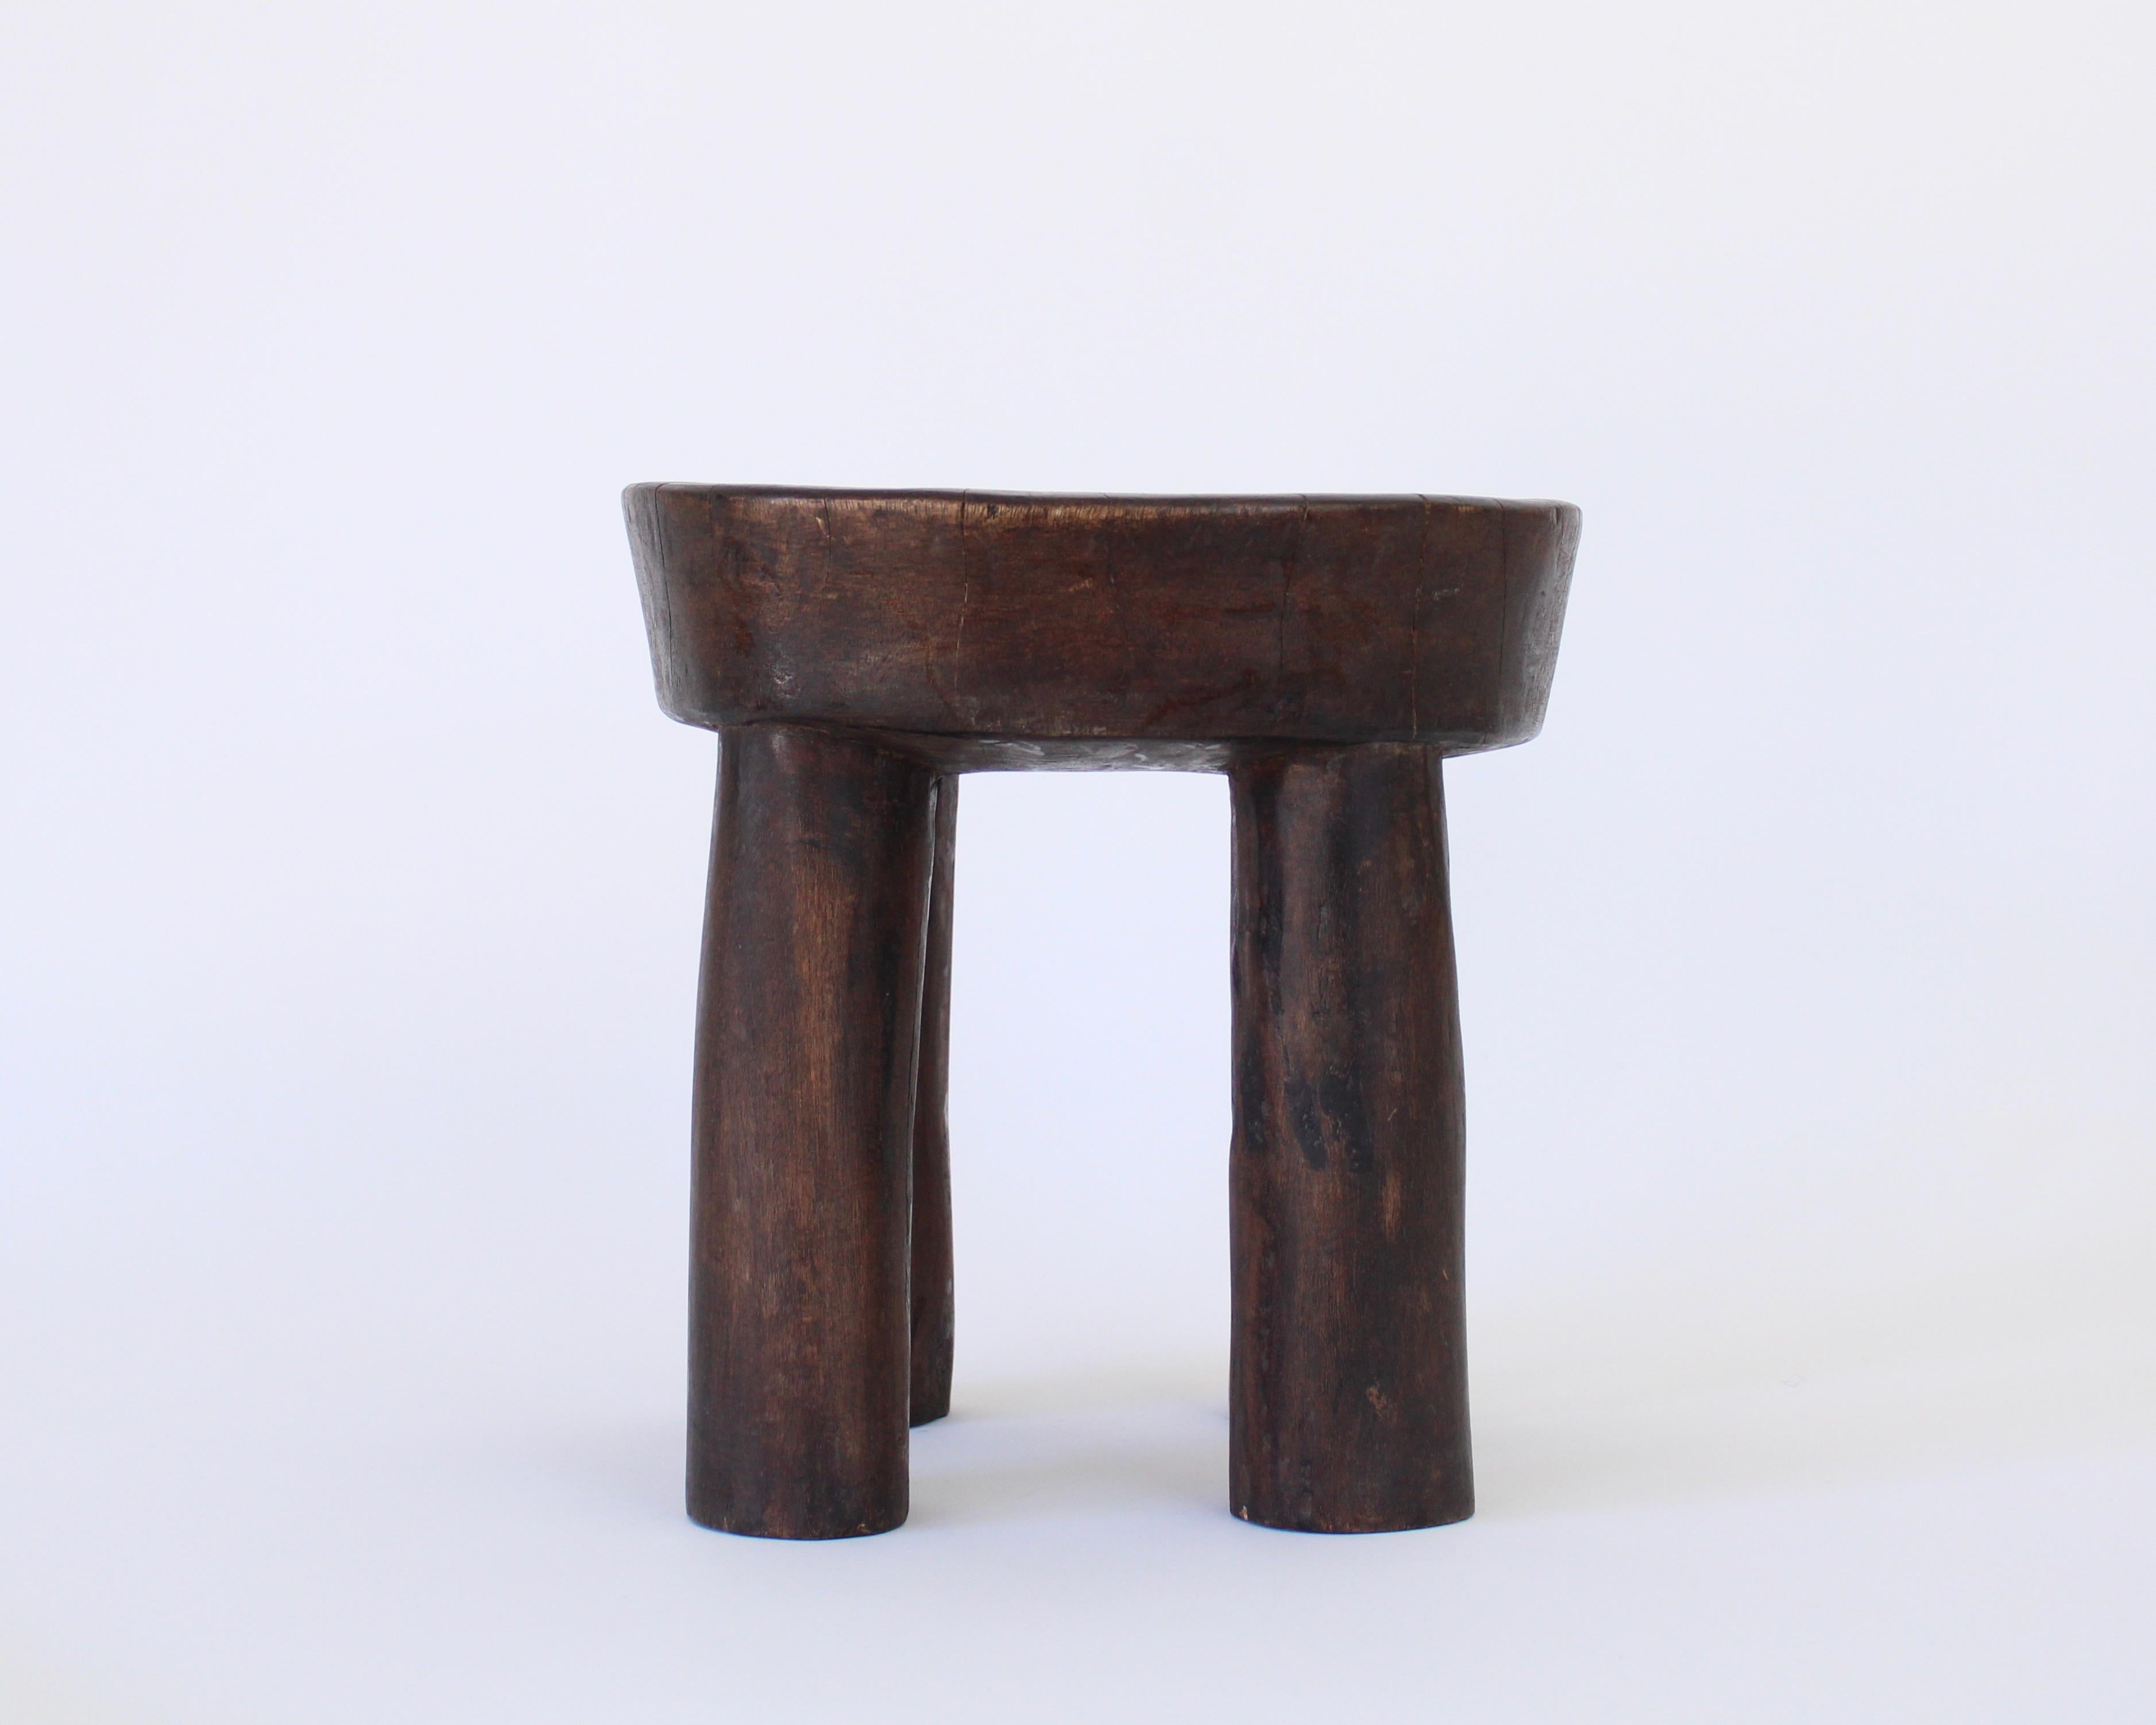 This African Lobi stool was created by the Lobi People of Ghana. It was carved from single blocks of wood, and has a wonderfully simple form. It has aged beautifully by use and exposure, and will bring history and authenticity into your space
The